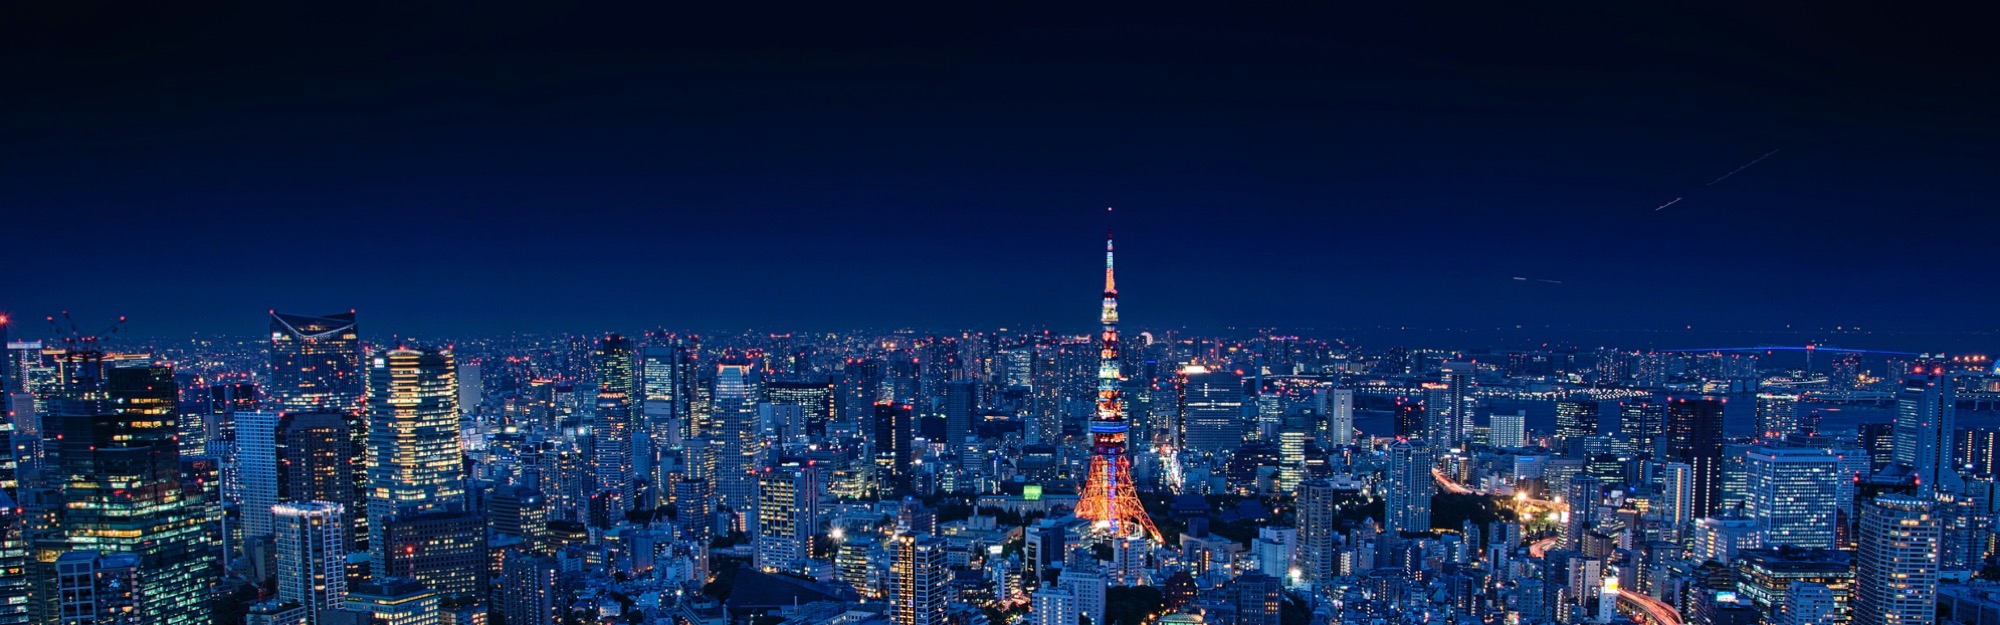 UK space, environment, materials & battery tech firms selected for Government support in Japan